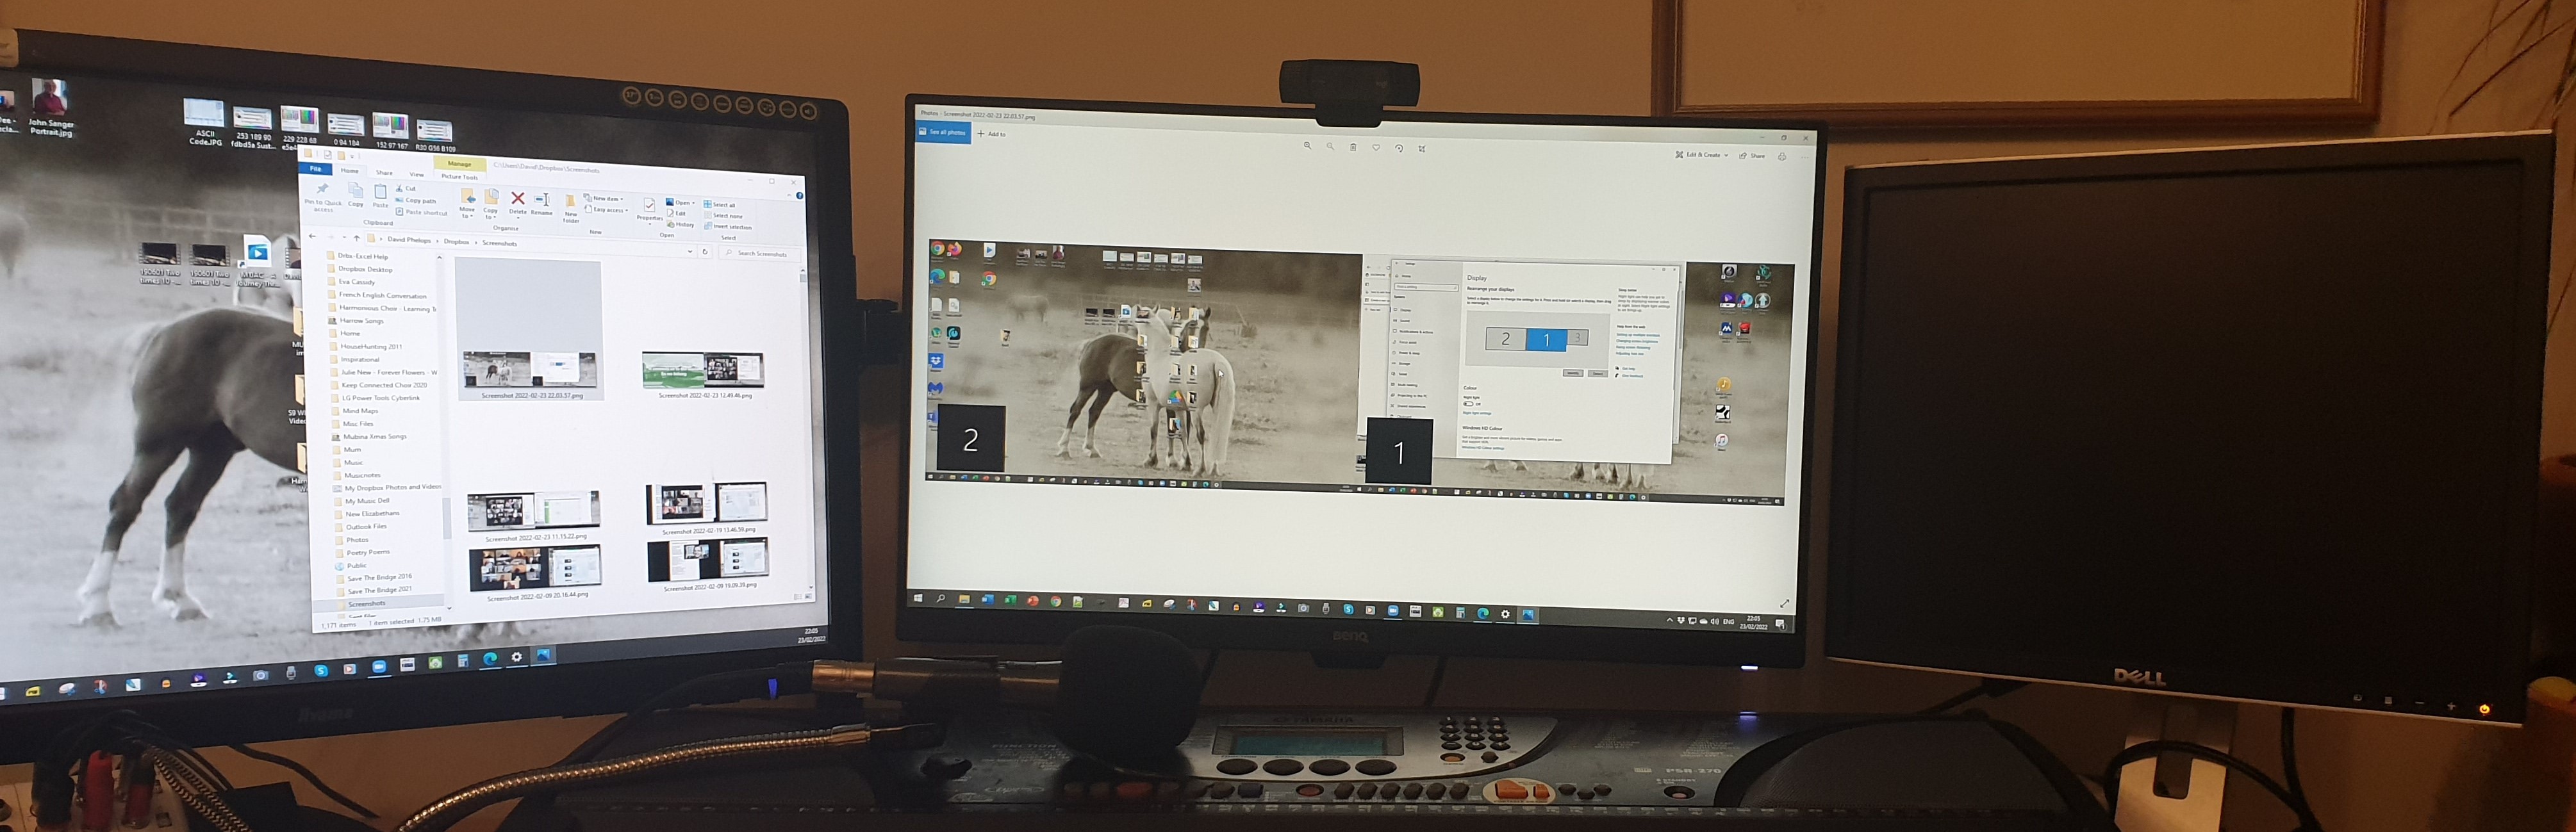 How to set up multiple monitors on Windows 10